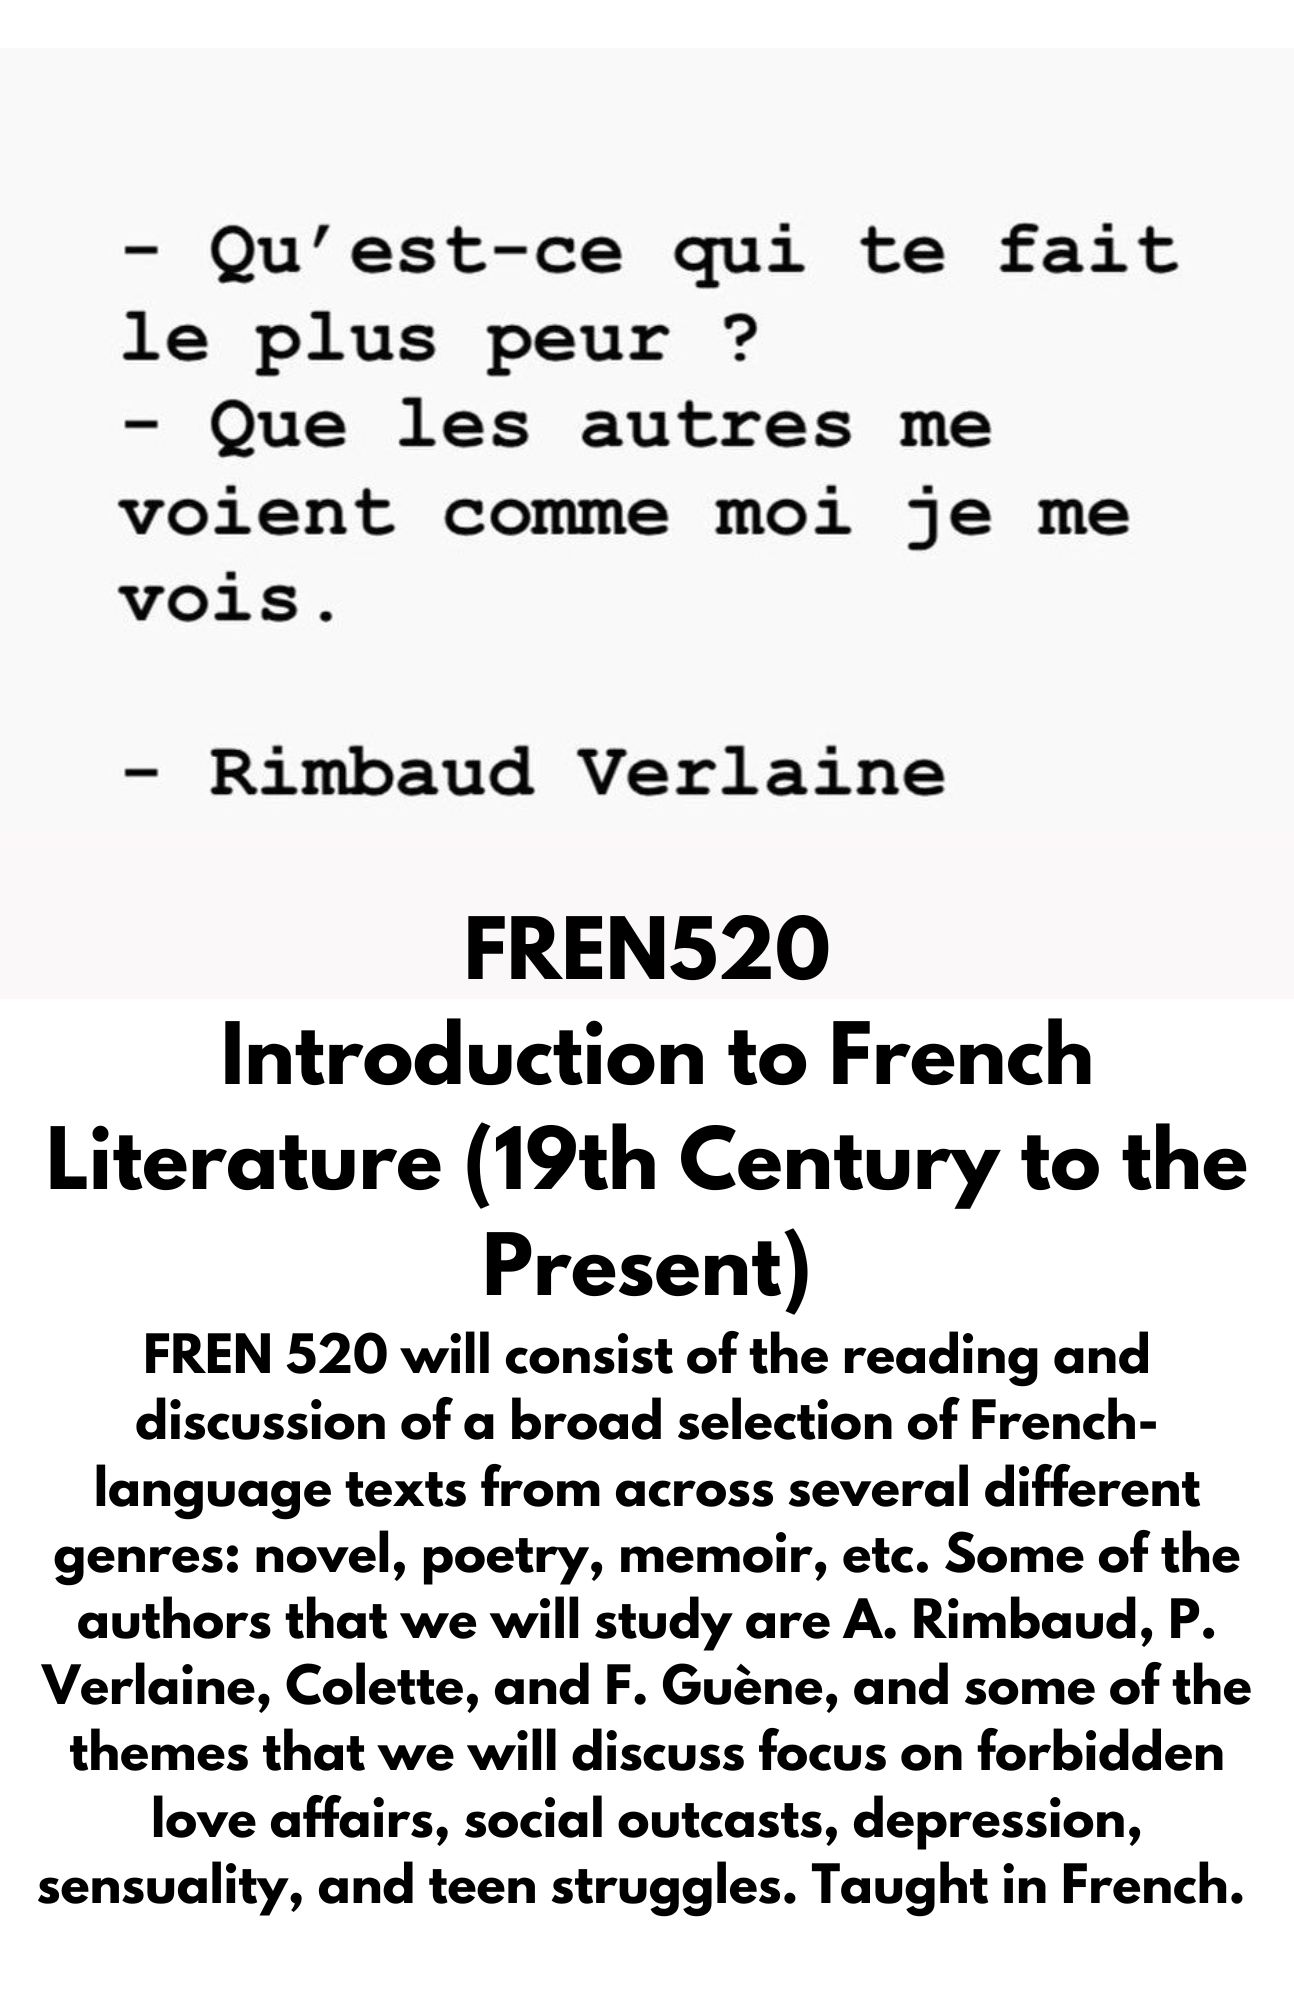 FREN 512 French/Francophone Cinema. Discover French and Francophone cinema through films of the French-speaking world from a variety of periods and genres. This class is appropriate for students who have completed French 4. It counts as an elective for the French major or minor.